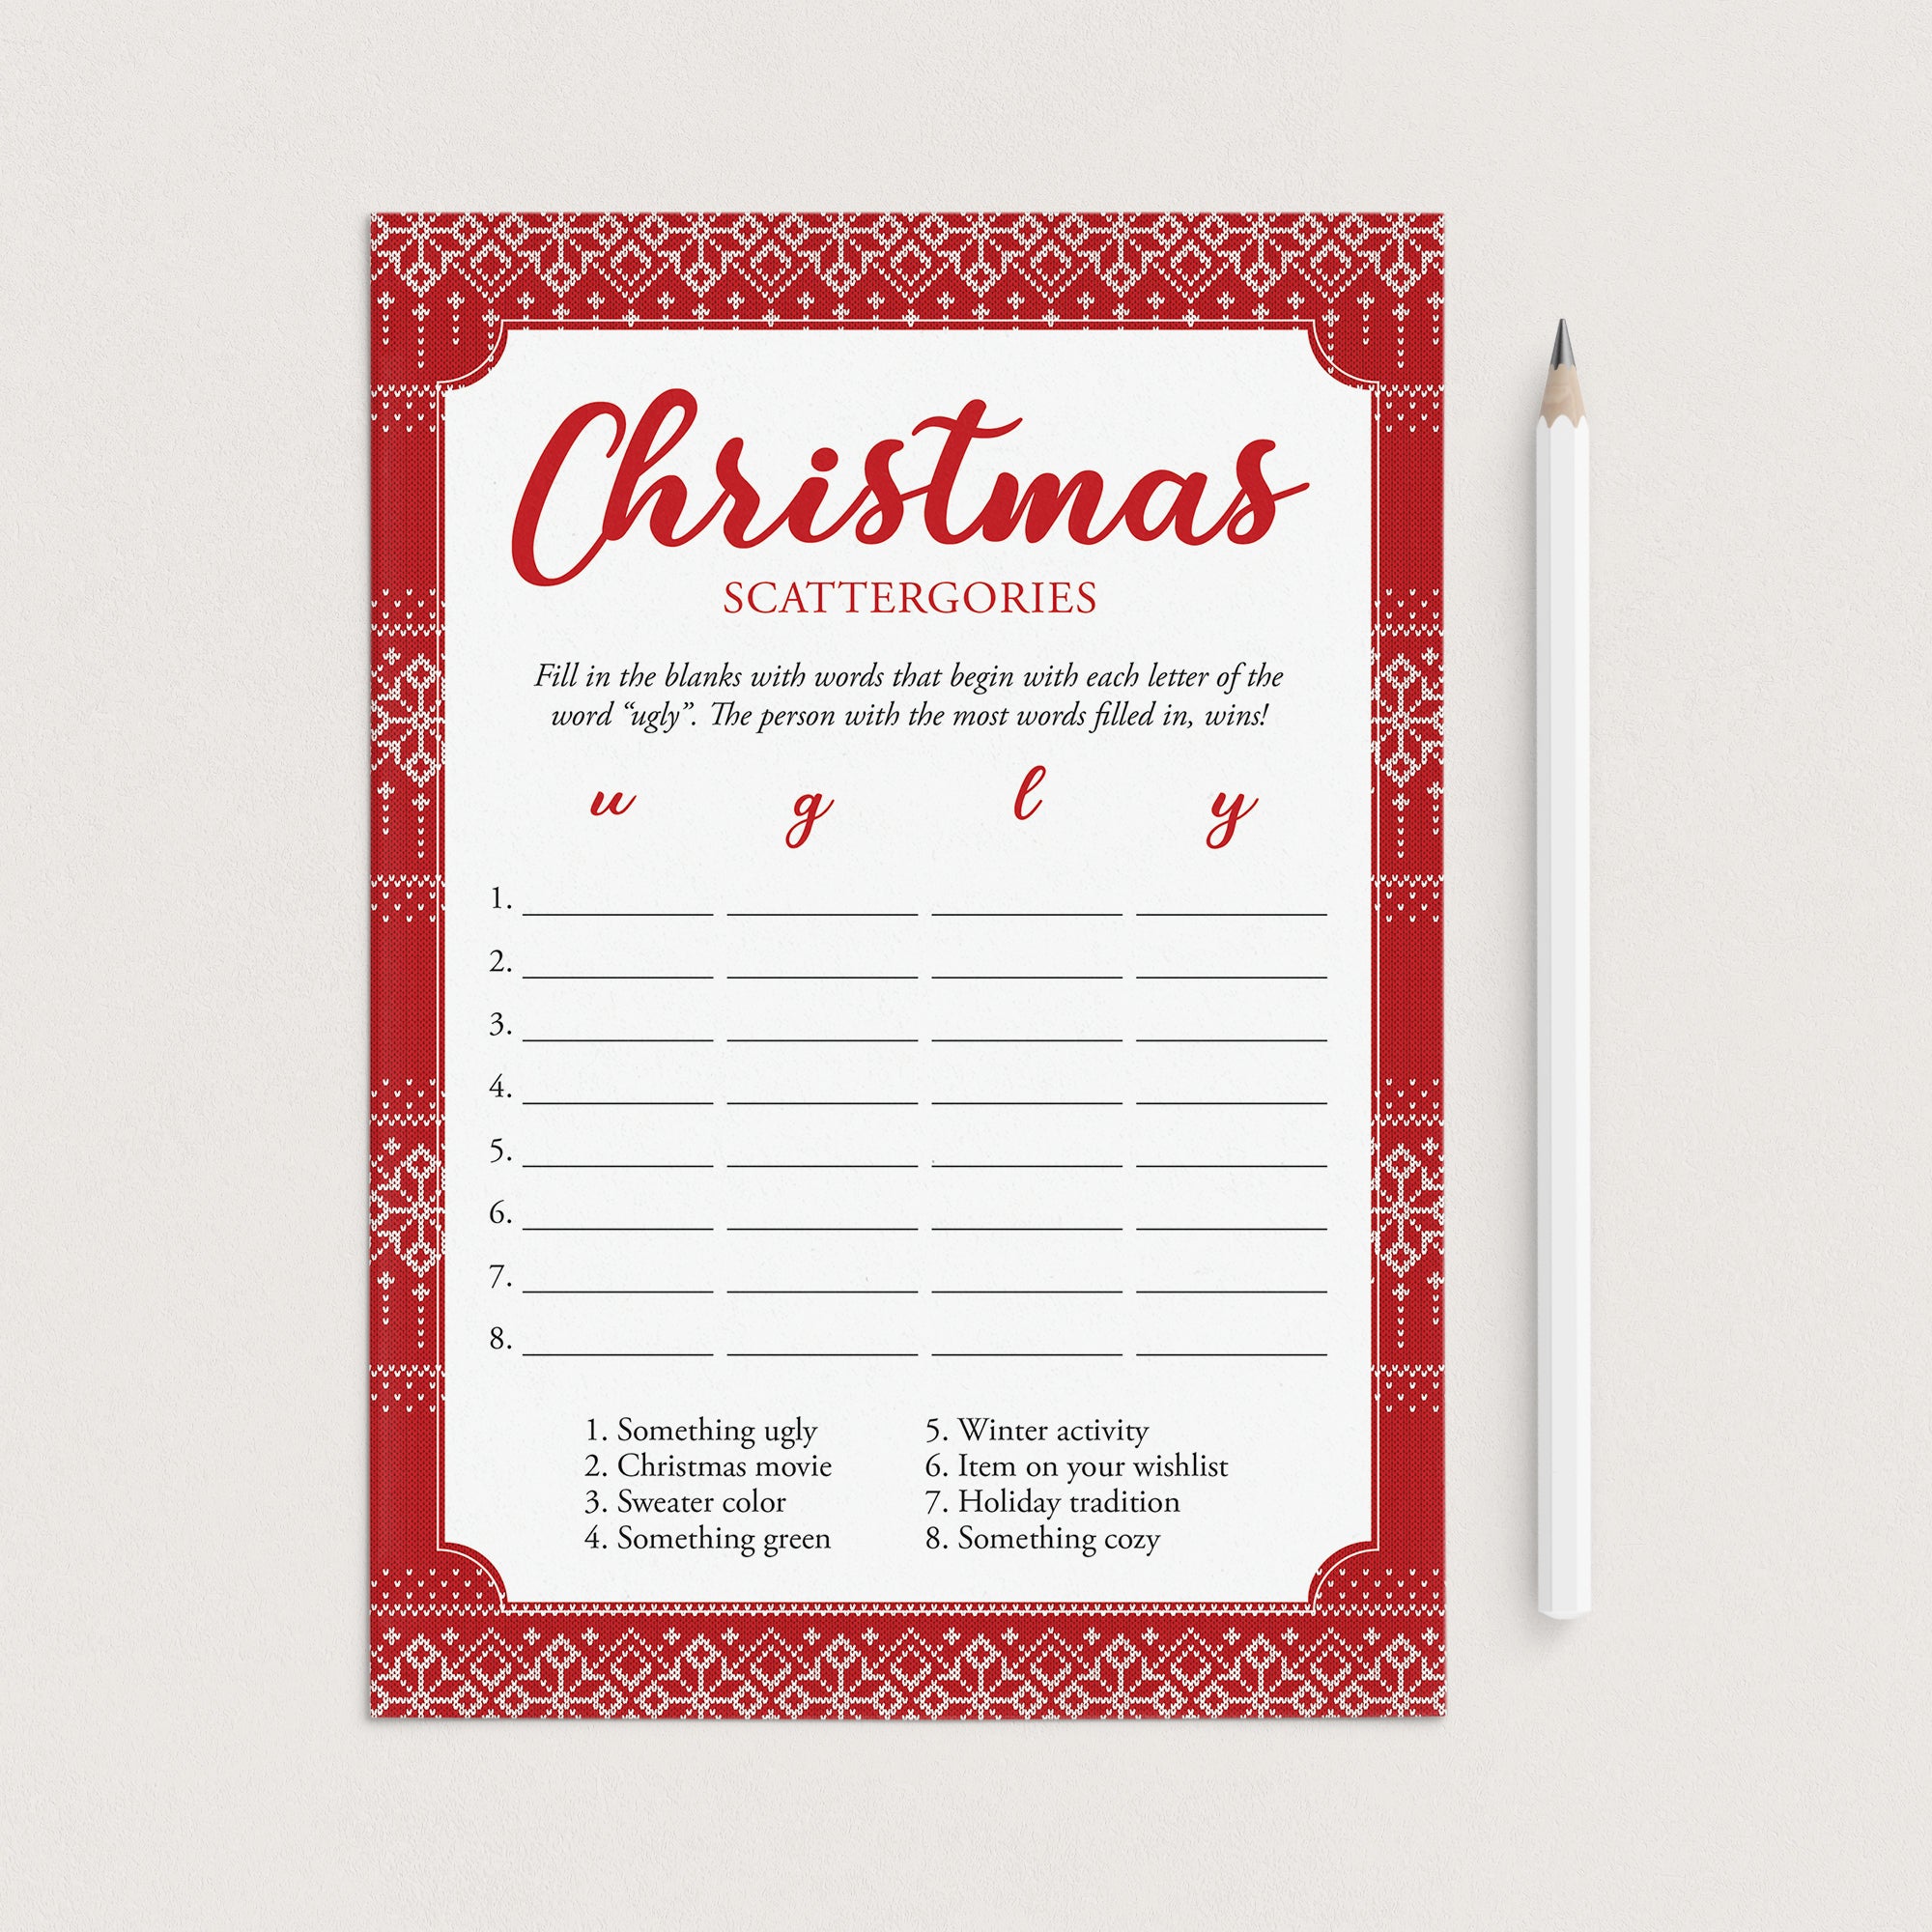 Christmas Scattergories Holiday Party Game Printable by LittleSizzle